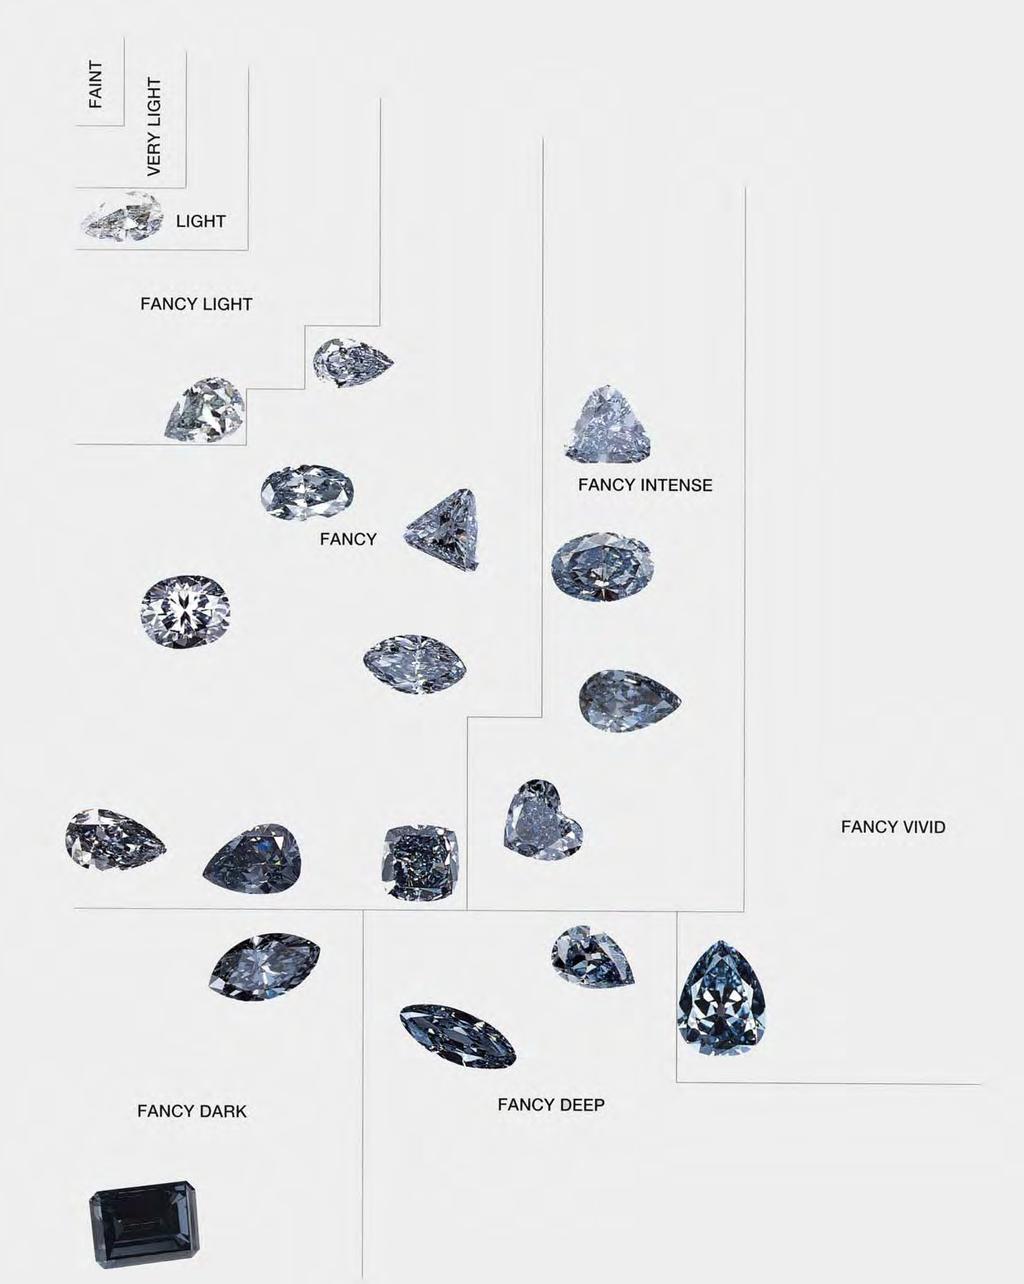 Figure 9. The images of blue diamonds superimposed on this chart of GIA GTL fancy grades illustrate the range of colors seen to date in blue diamonds.